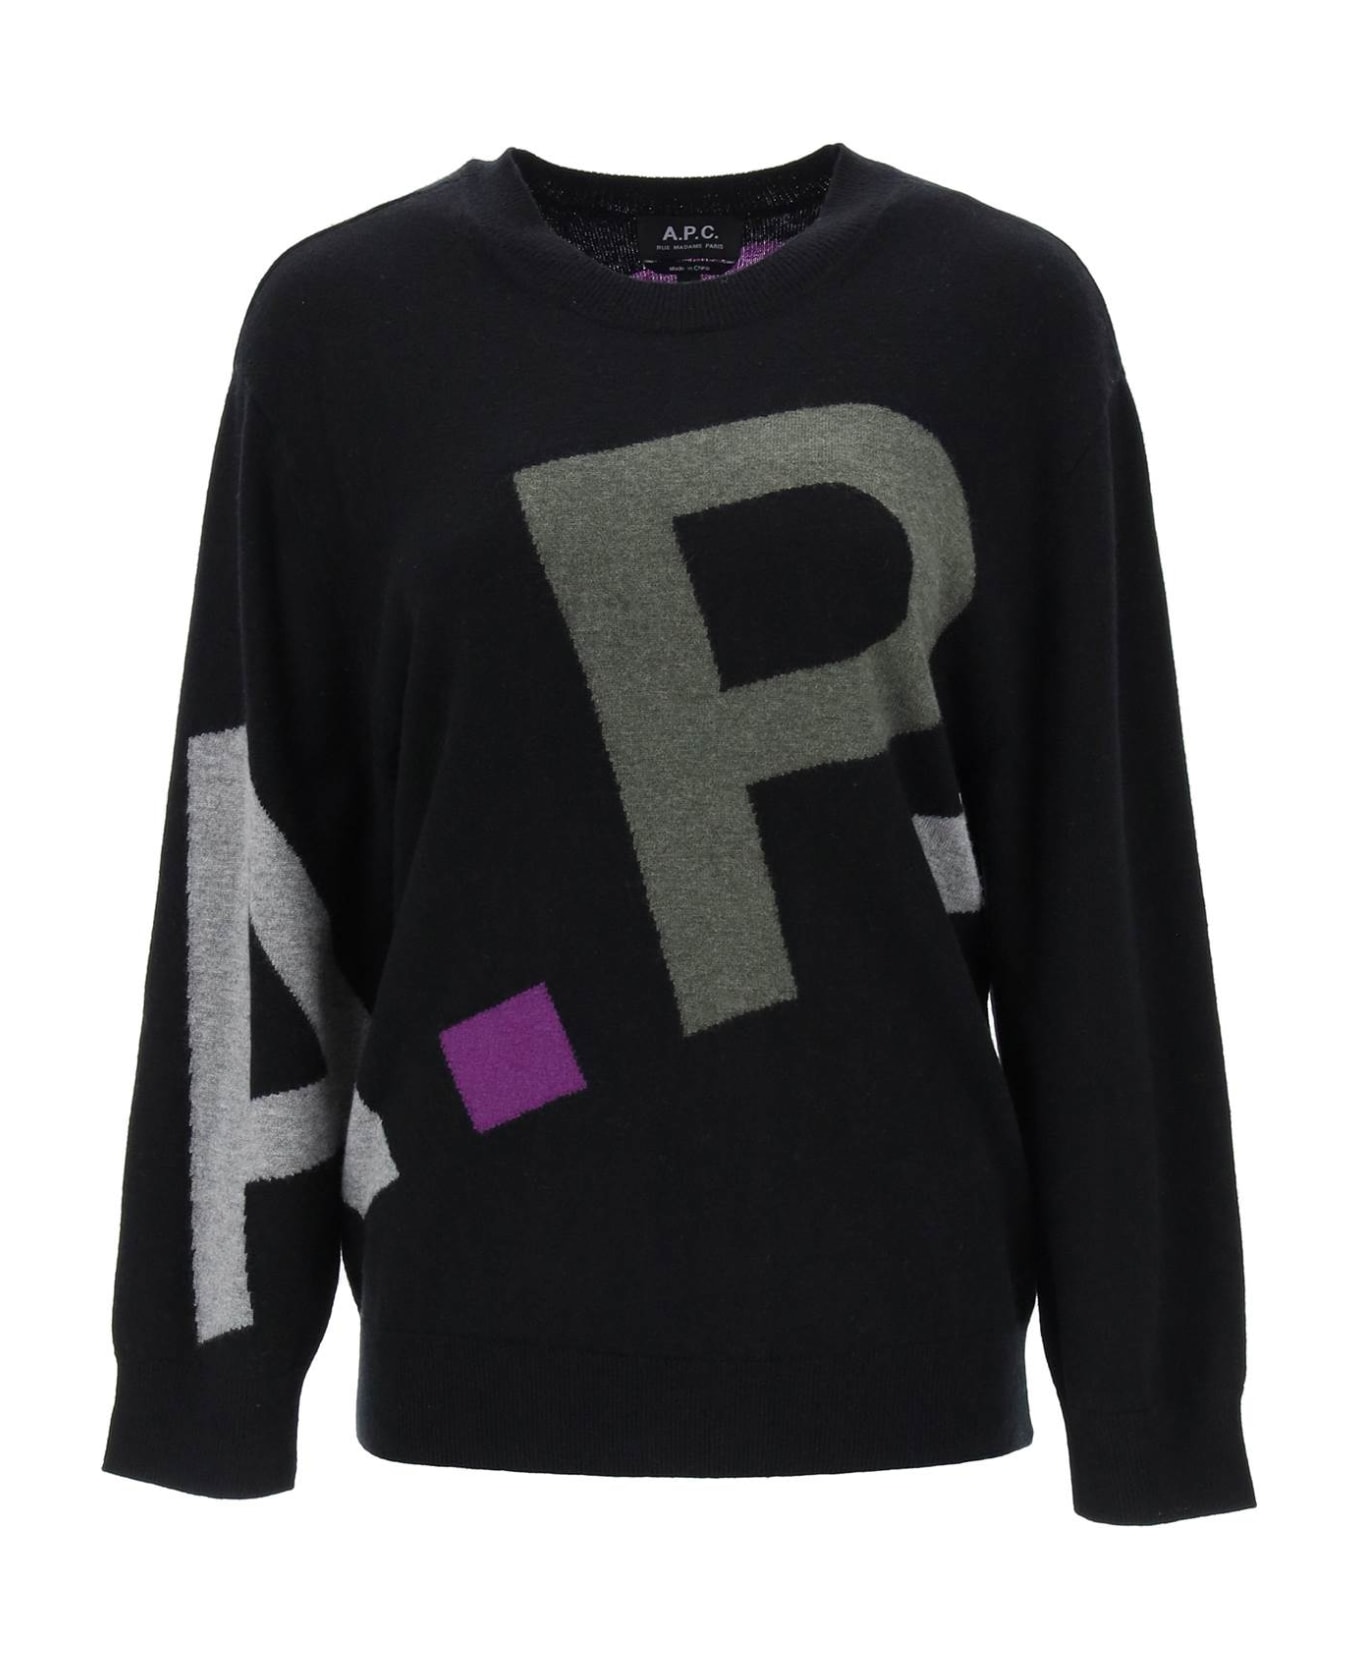 A.P.C. Logo All Over F Sweater - BLACK